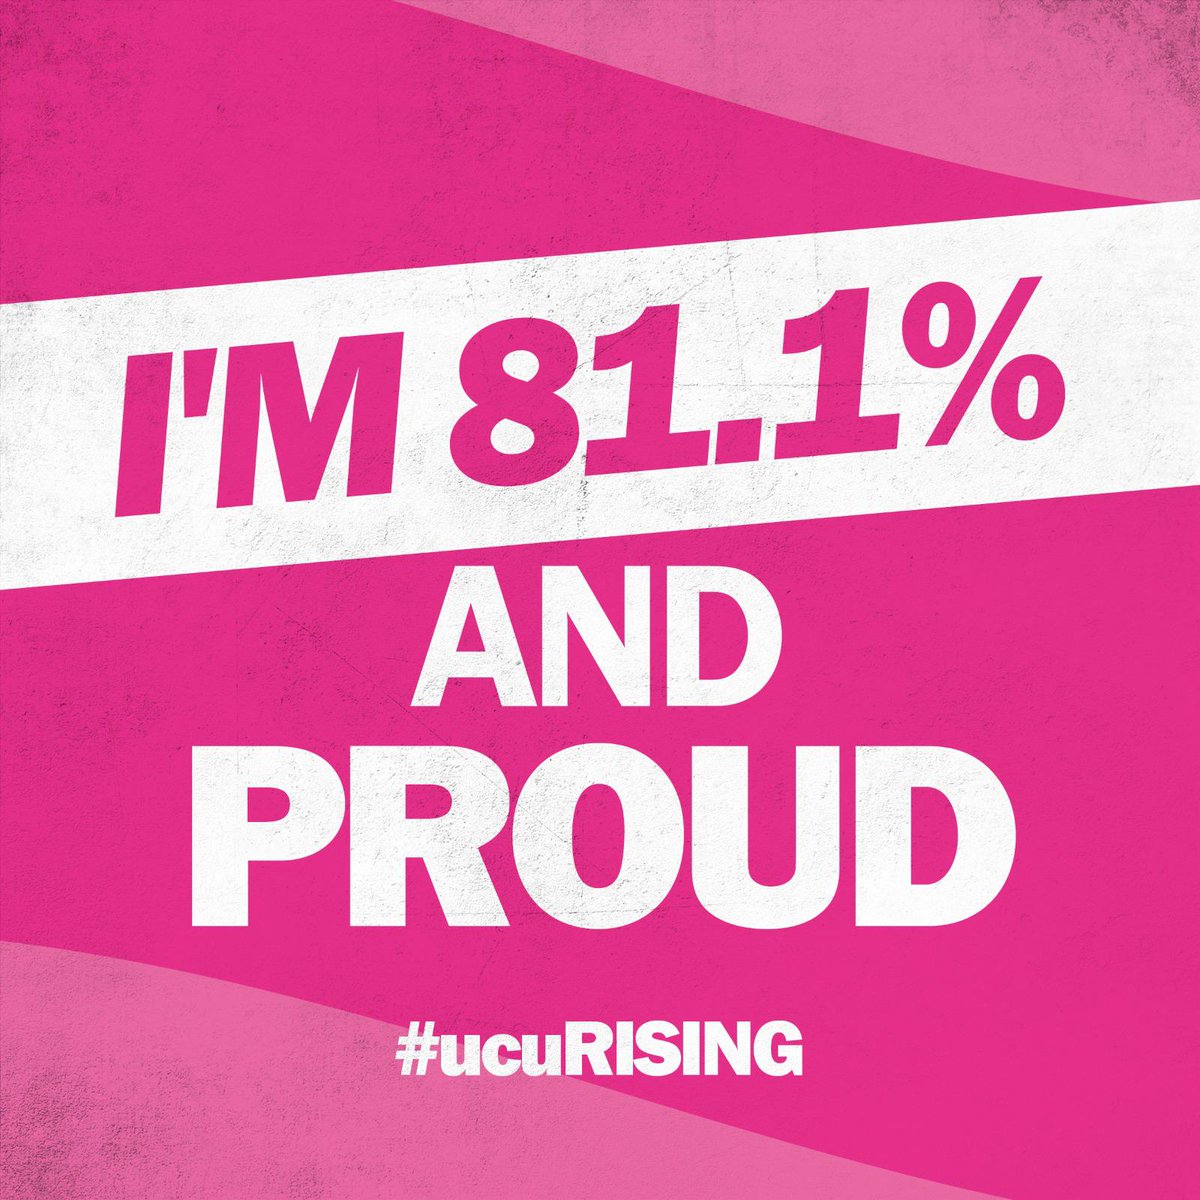 WE DID IT! Our union has smashed the threshold and delivered a massive YES vote in the pay and conditions ballot History has been made #ucuRISING